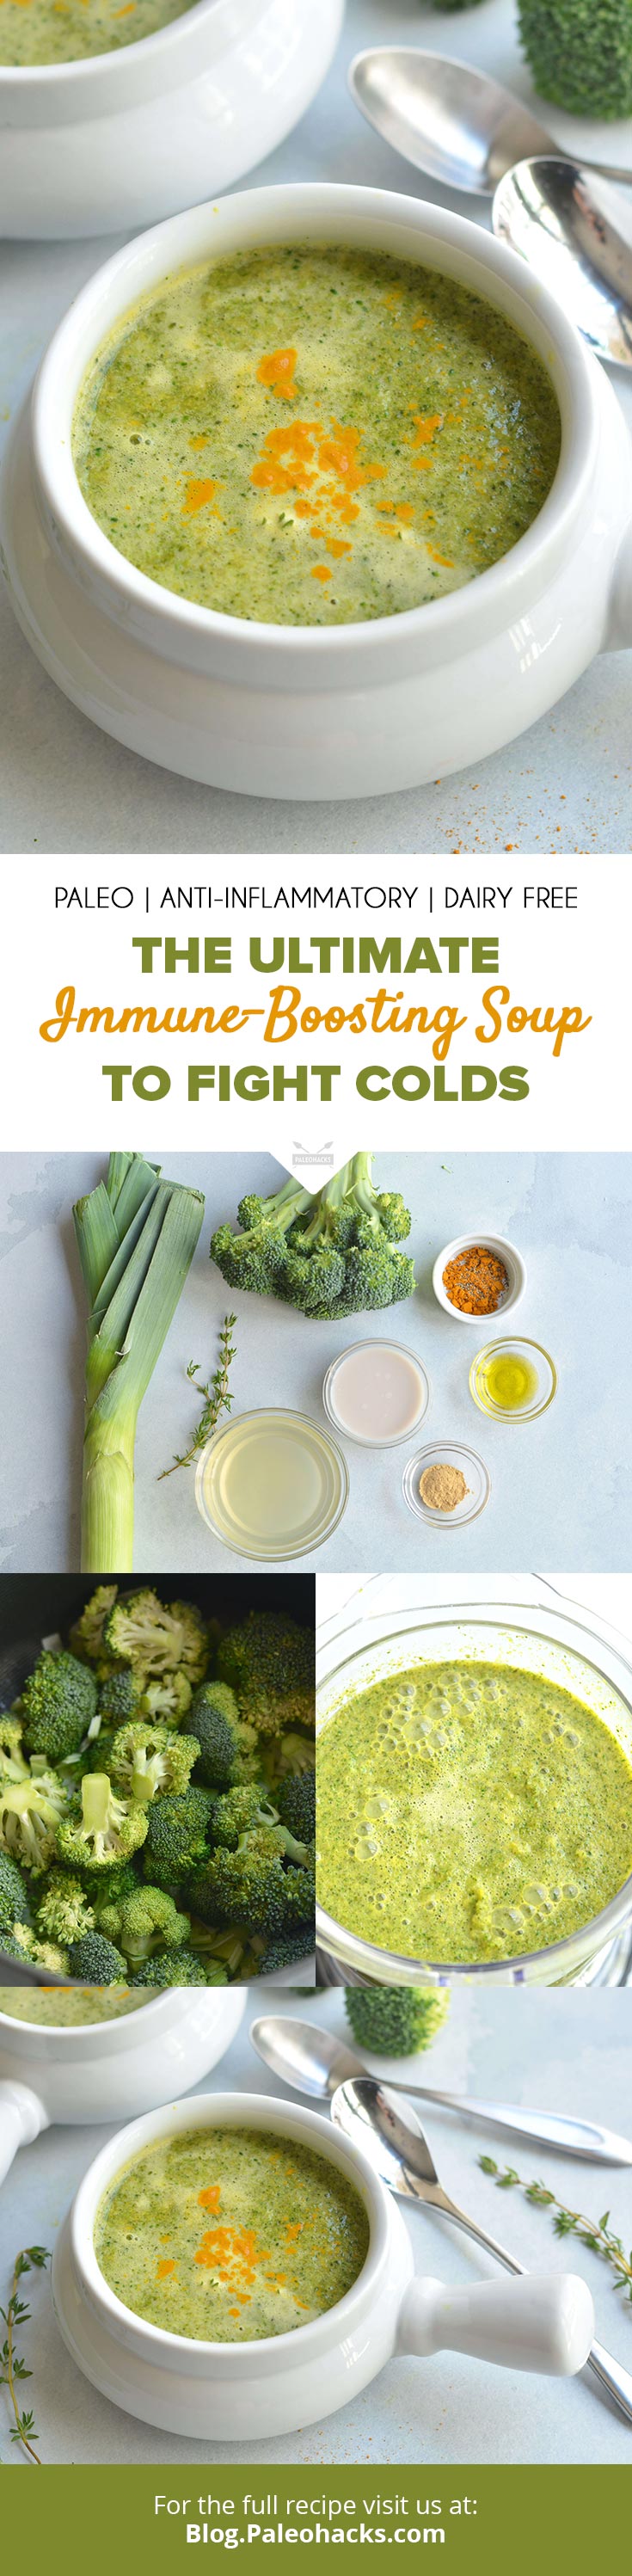 This vibrant immune-boosting soup is made from broccoli, leeks and turmeric for a tasty, veggie-loaded meal that helps keep sickness at bay.